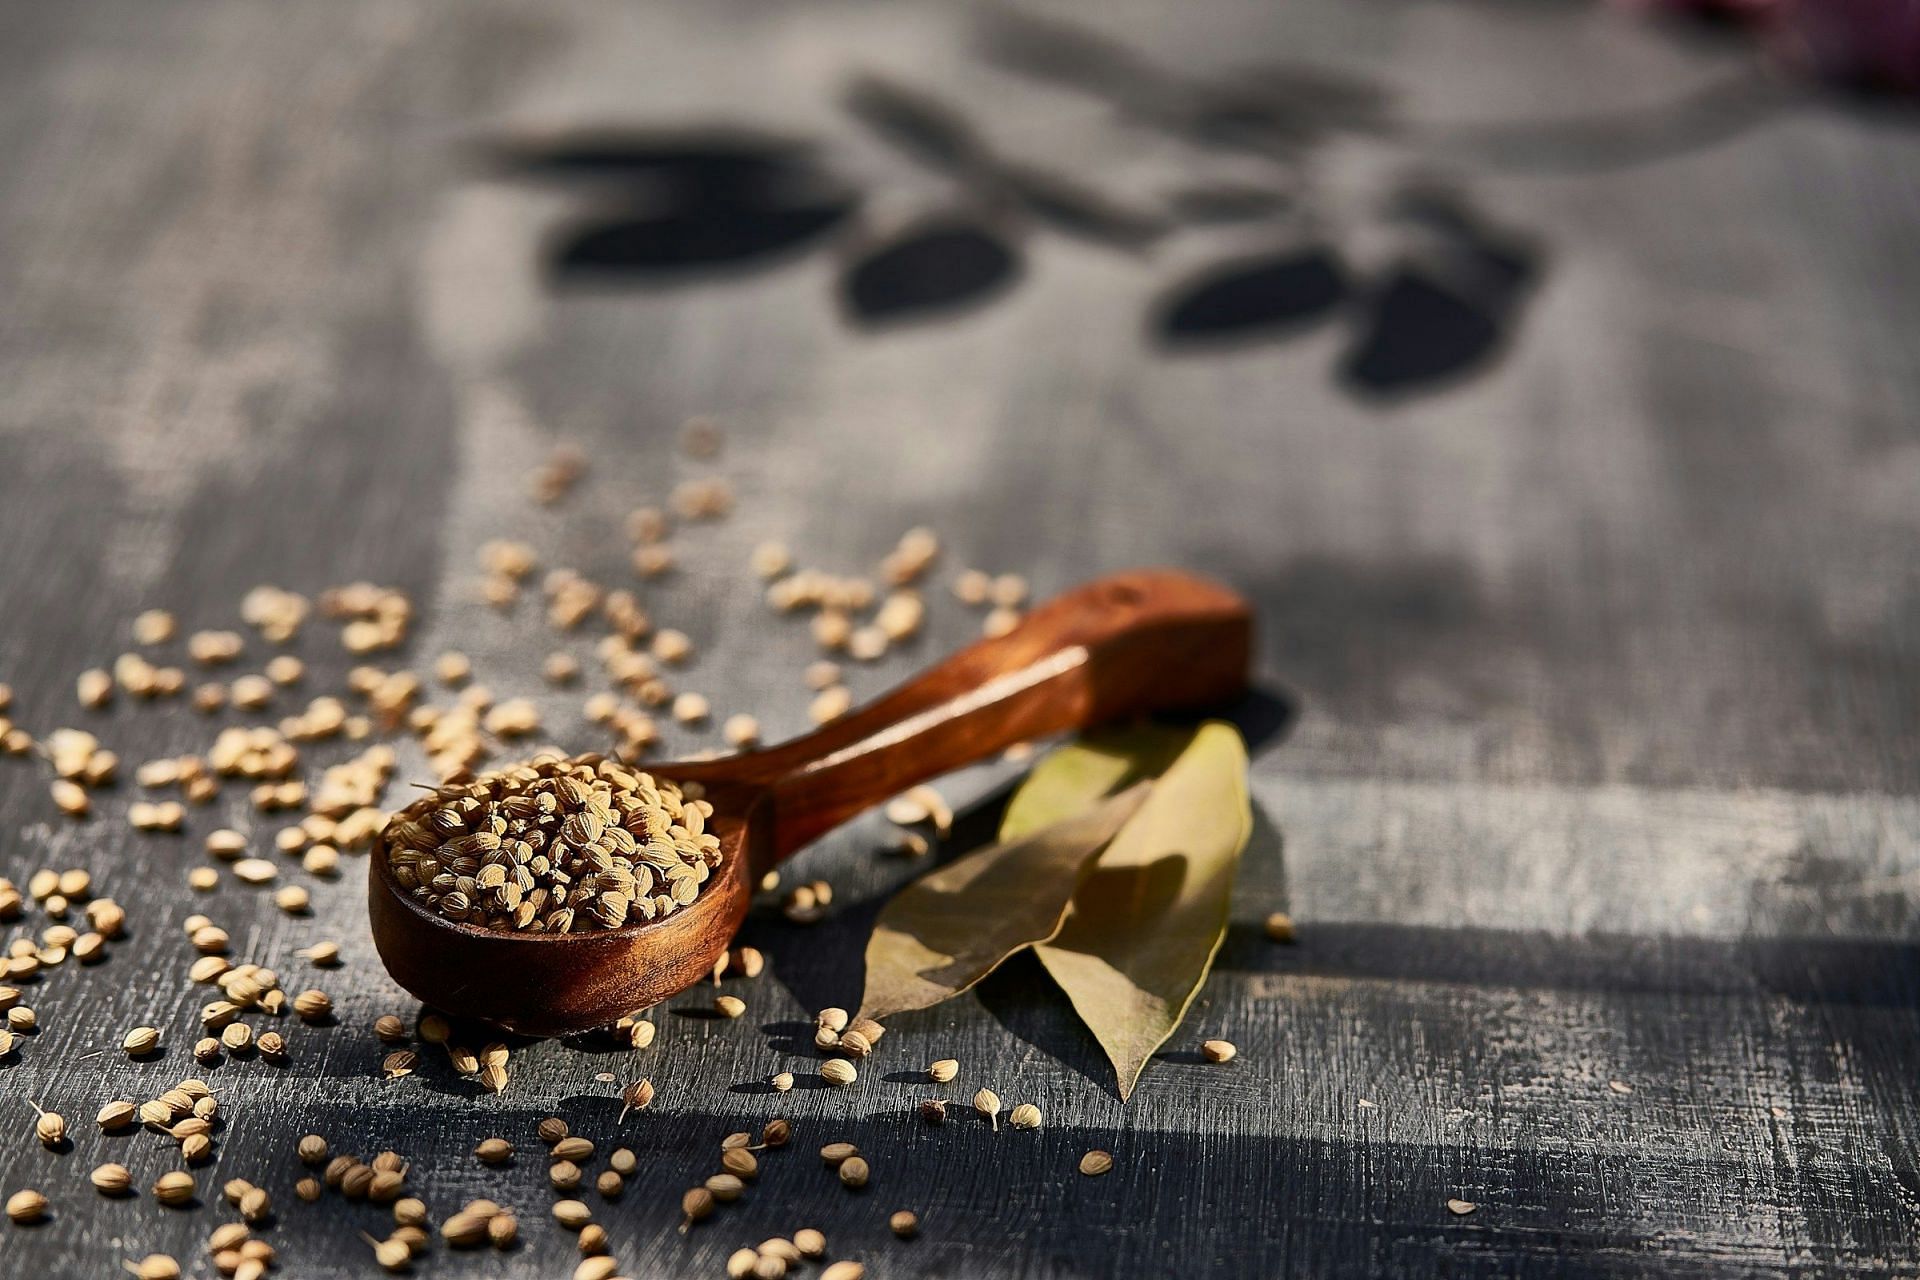 Coriander:A commonly used spice (Image by Swapnil Dwivedi/Unsplash)